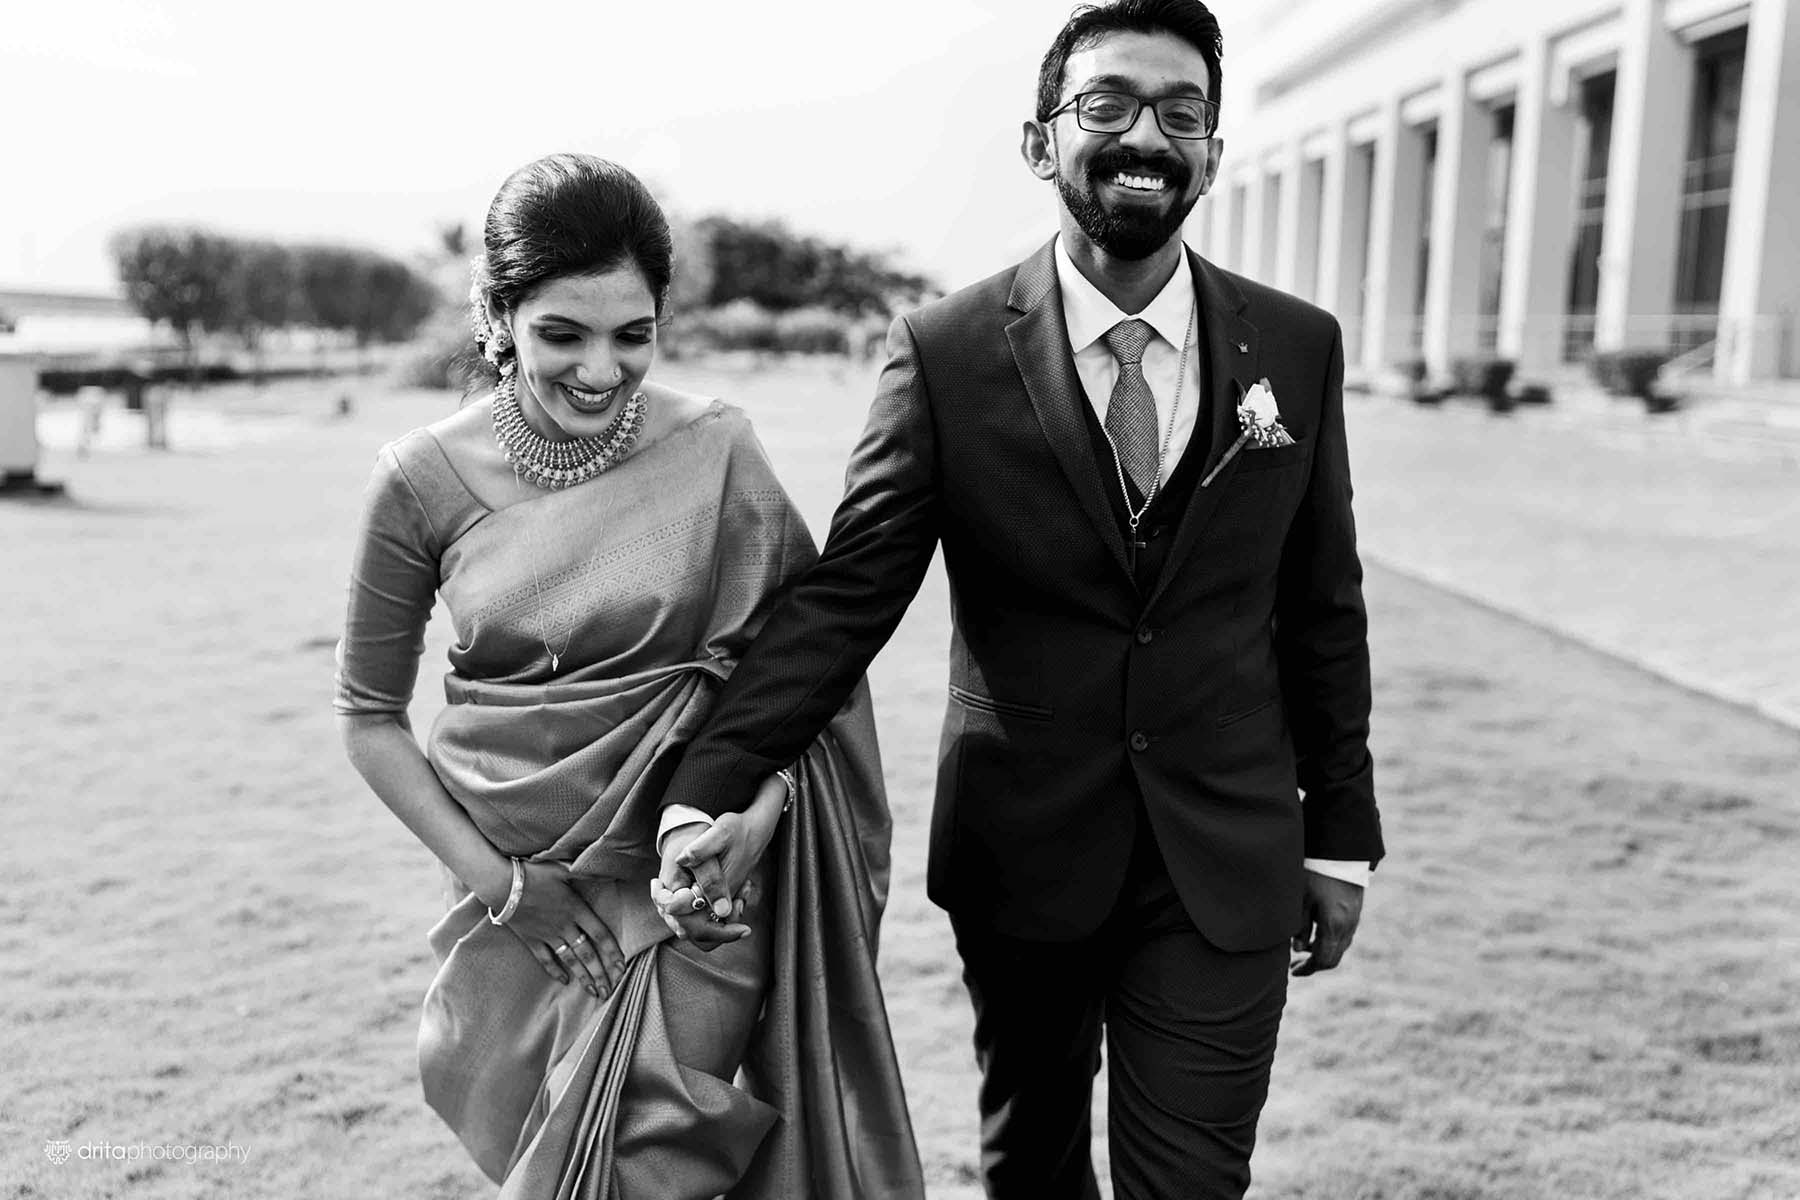 In this covid situation Jebin Drita Photography captured a world class wedding of Naveen and Maria 2020